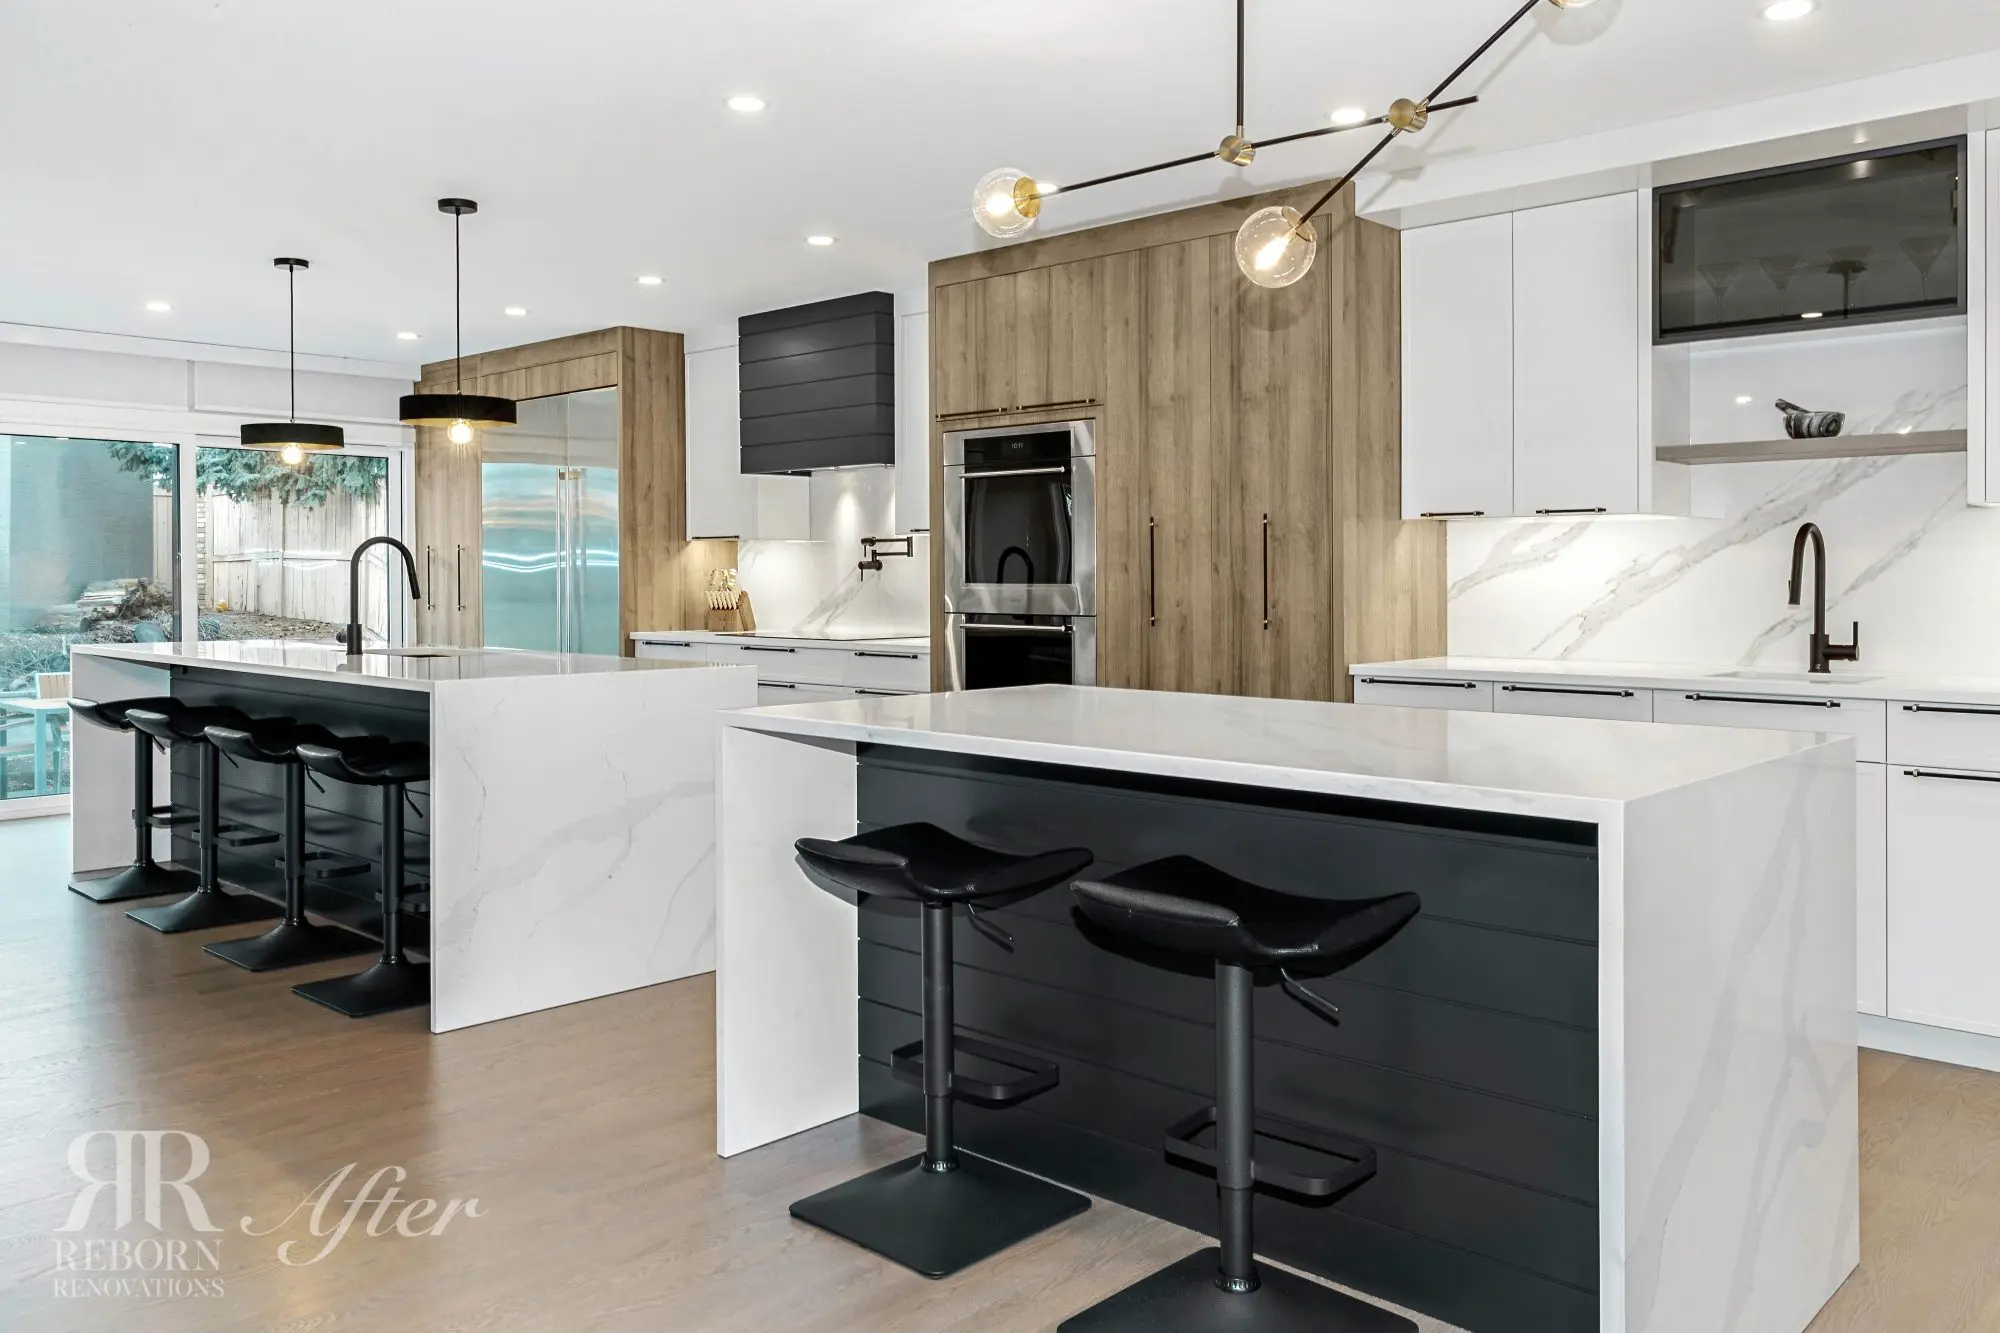 How Much Does a Calgary Kitchen Renovation Cost in 2023?